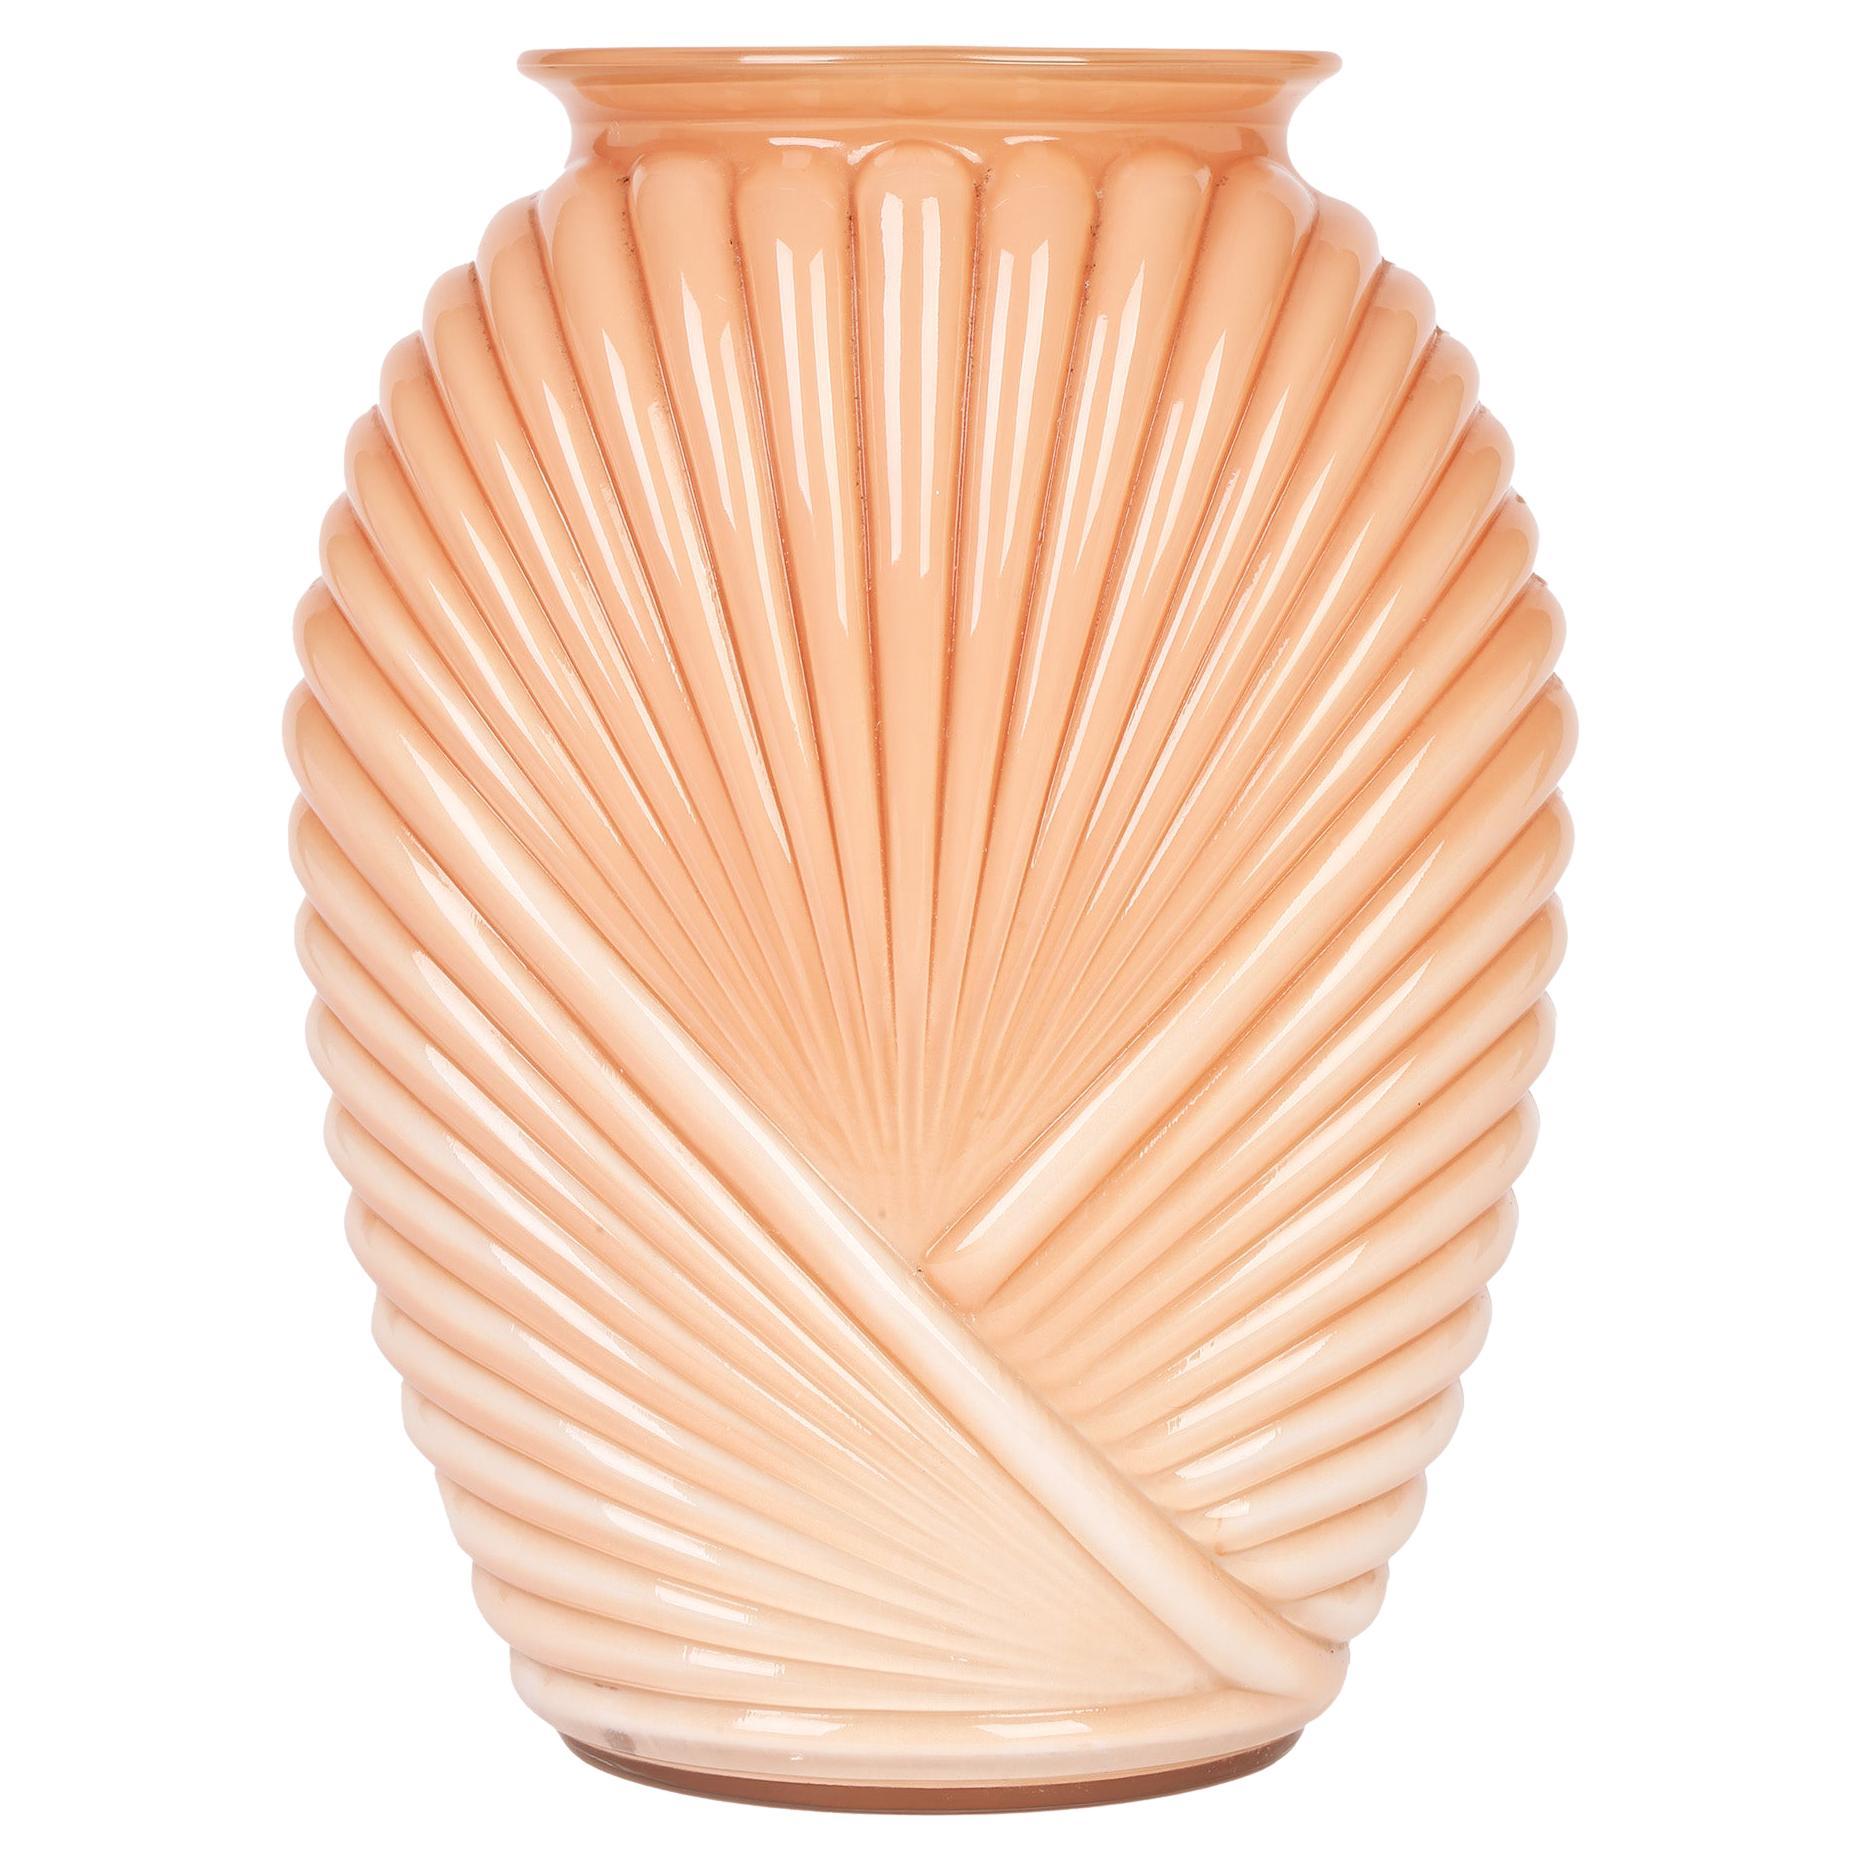 Anchor Hocking Art Deco Style Salmon Pink Molded Fan Pattern Glass Vase